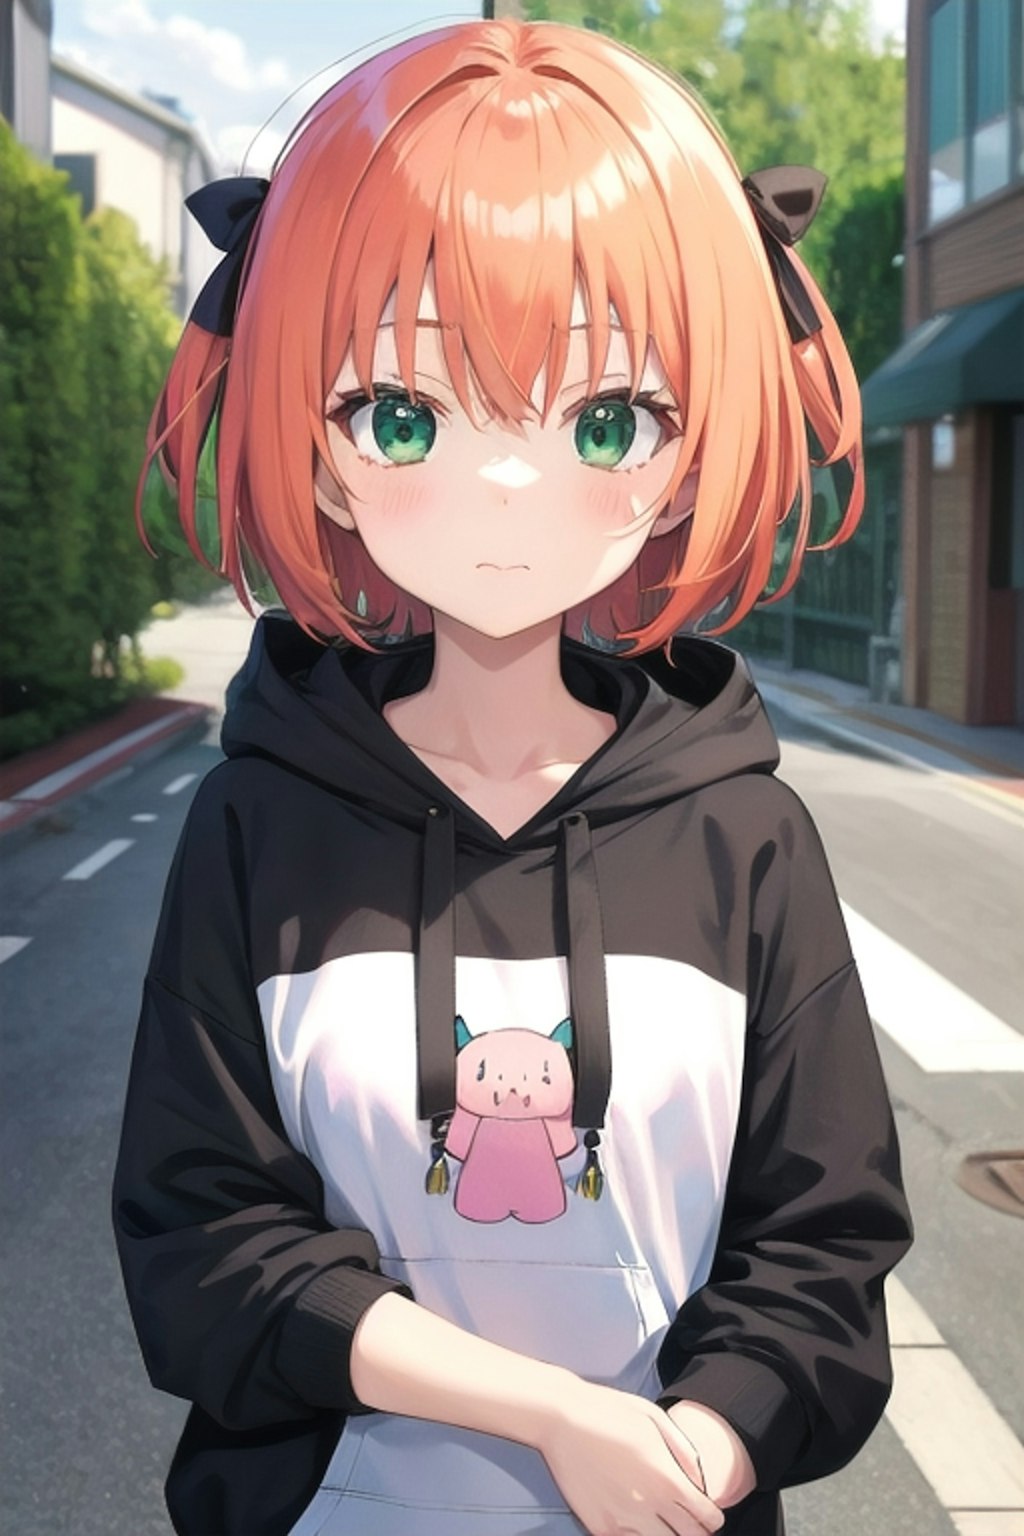 With a Cute Hoodie